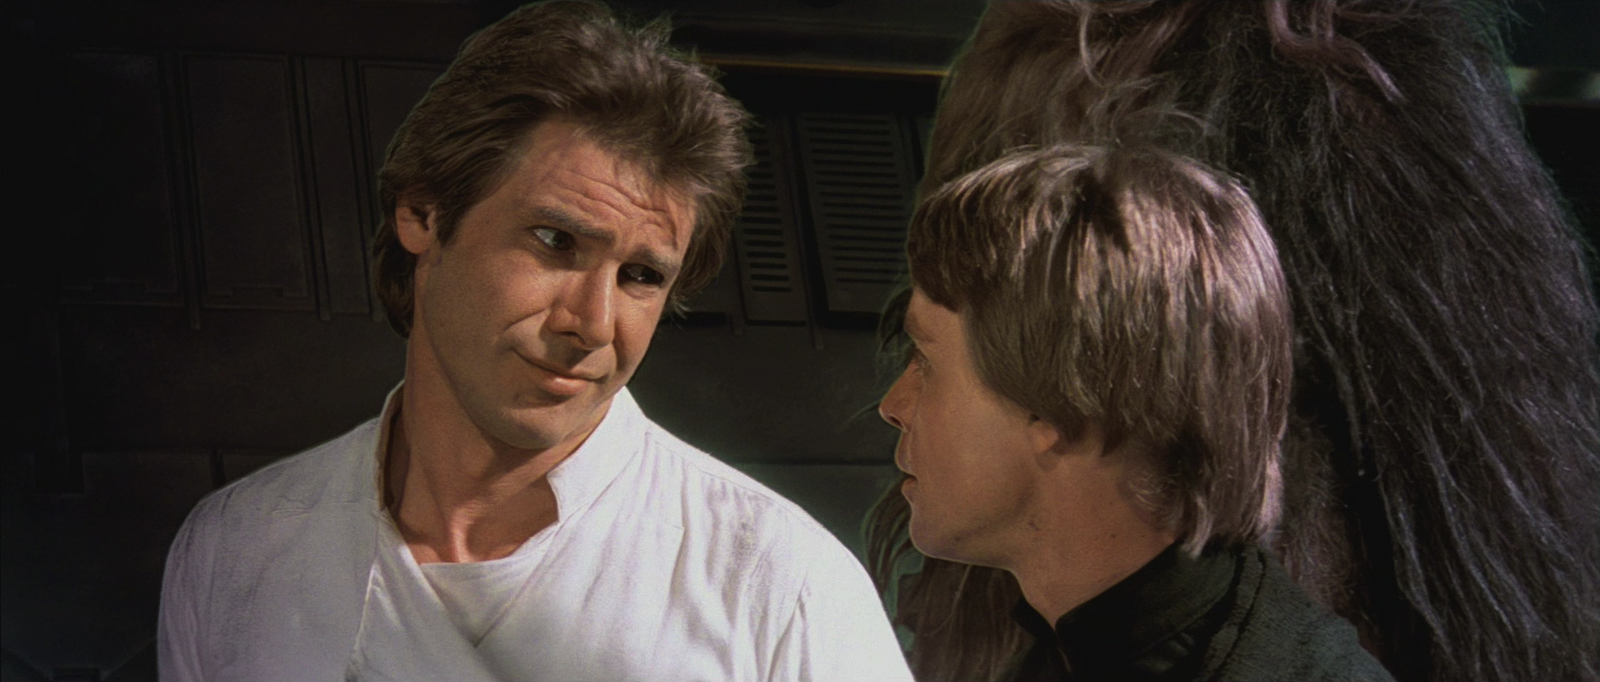 How old was harrison ford in star wars episode 4 #4